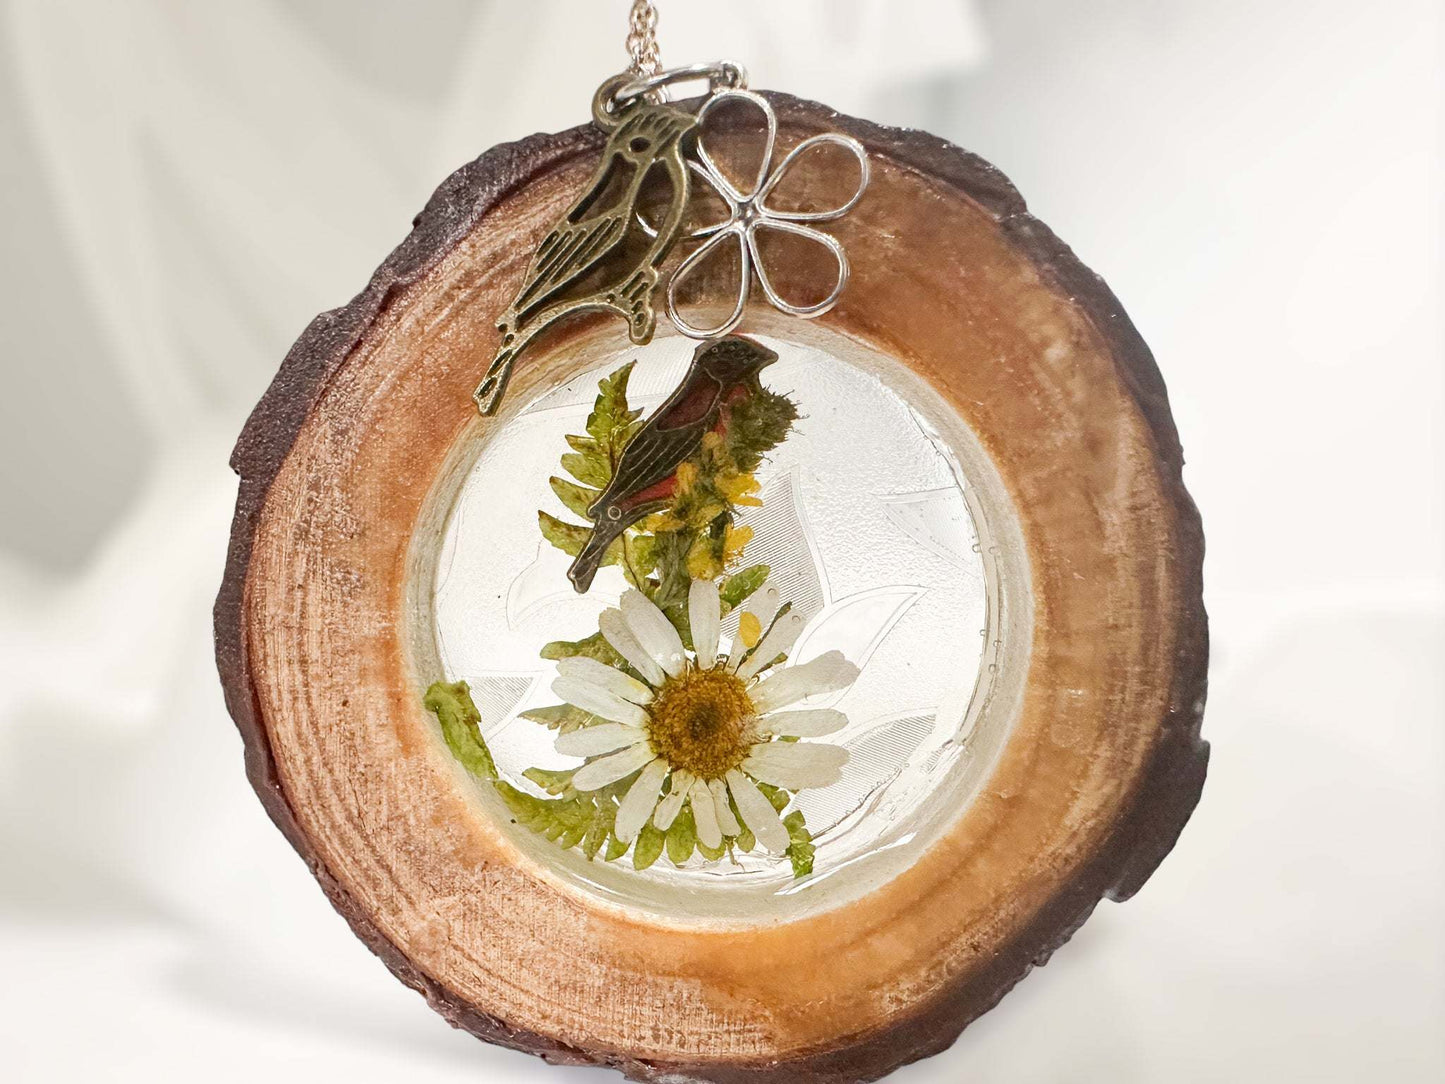 Enchanted Forest: Wood Slice Suncatcher wtih Real Dried Mushrooms and Flowers